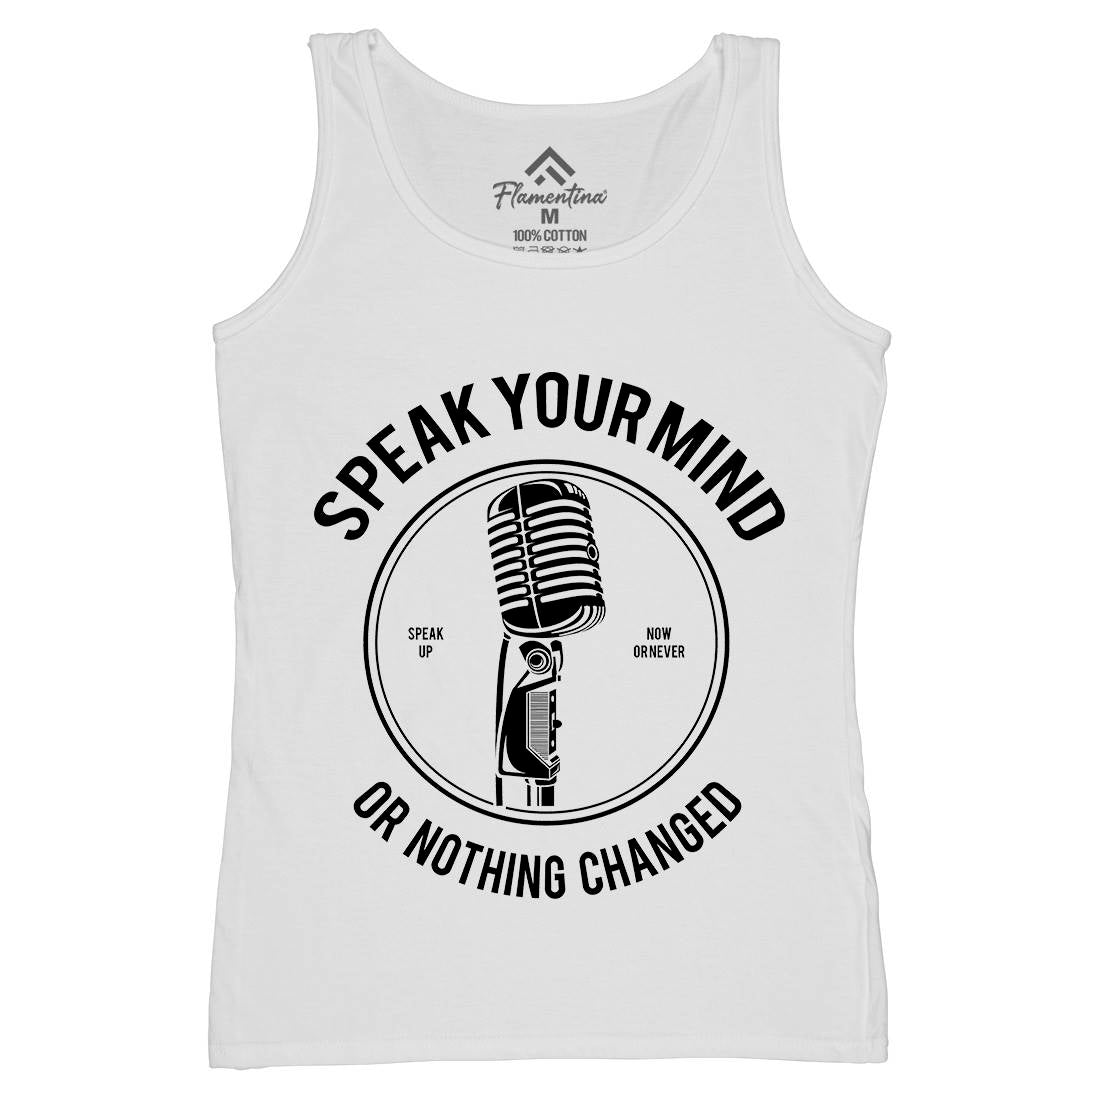 Speak Your Mind Womens Organic Tank Top Vest Quotes A152